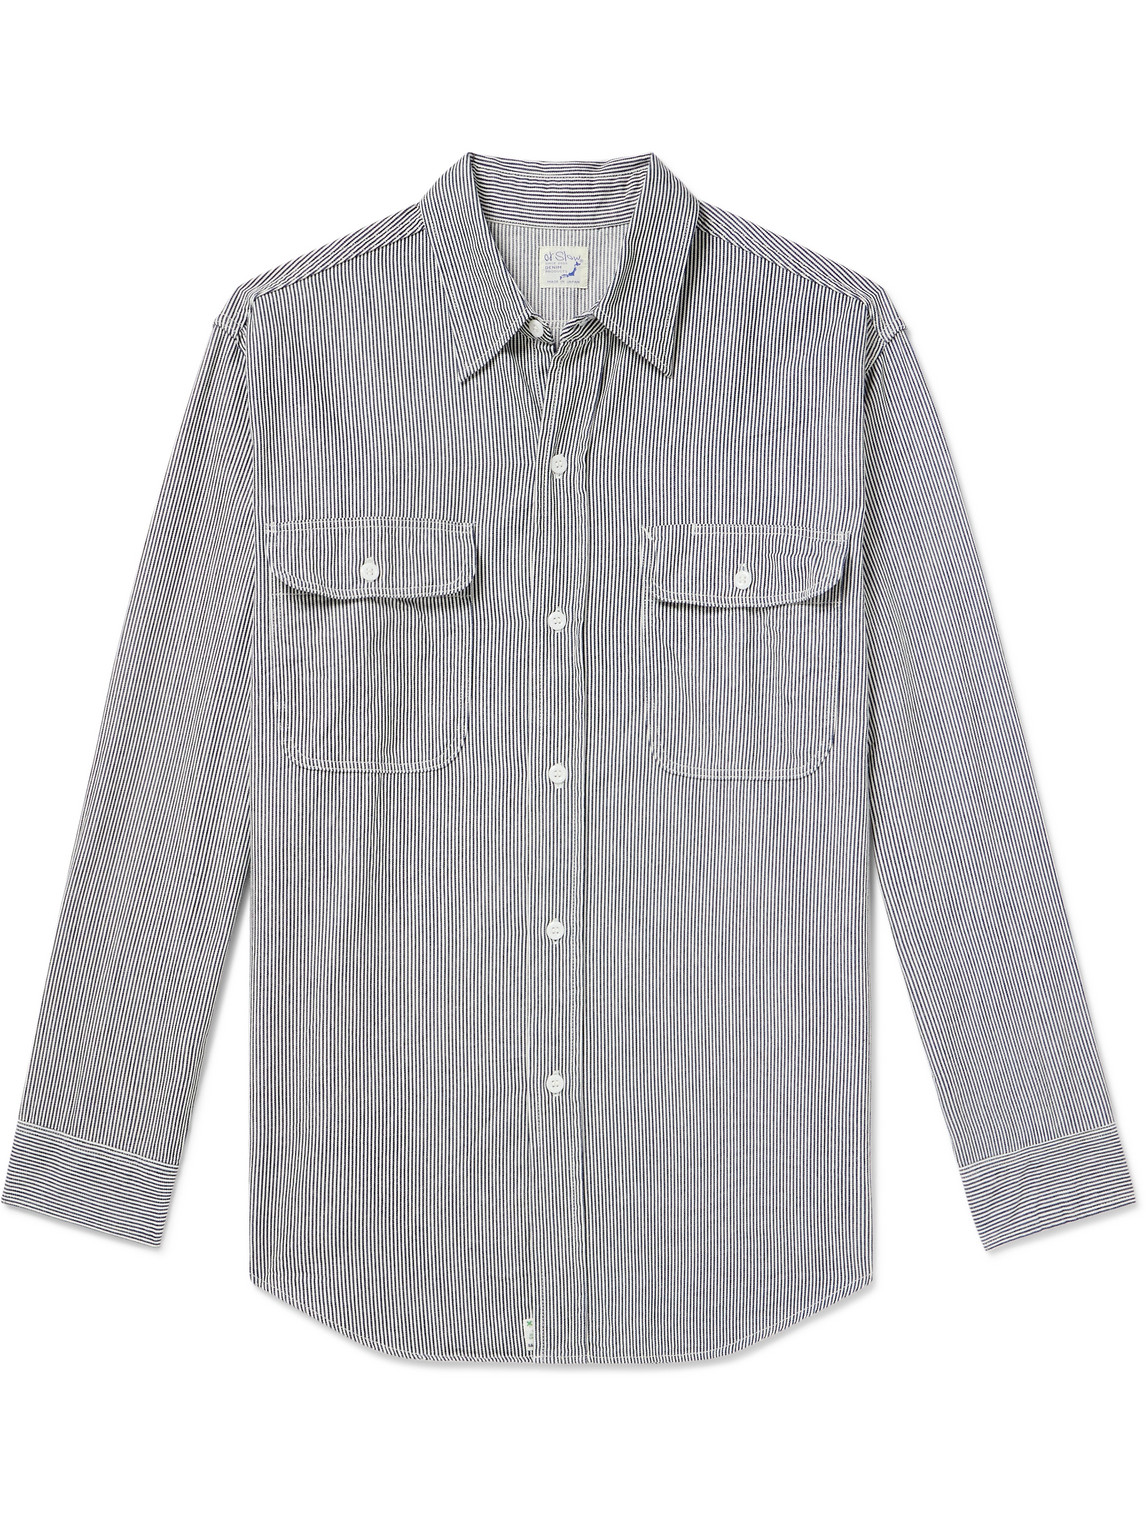 Orslow Striped Cotton Shirt In Gray